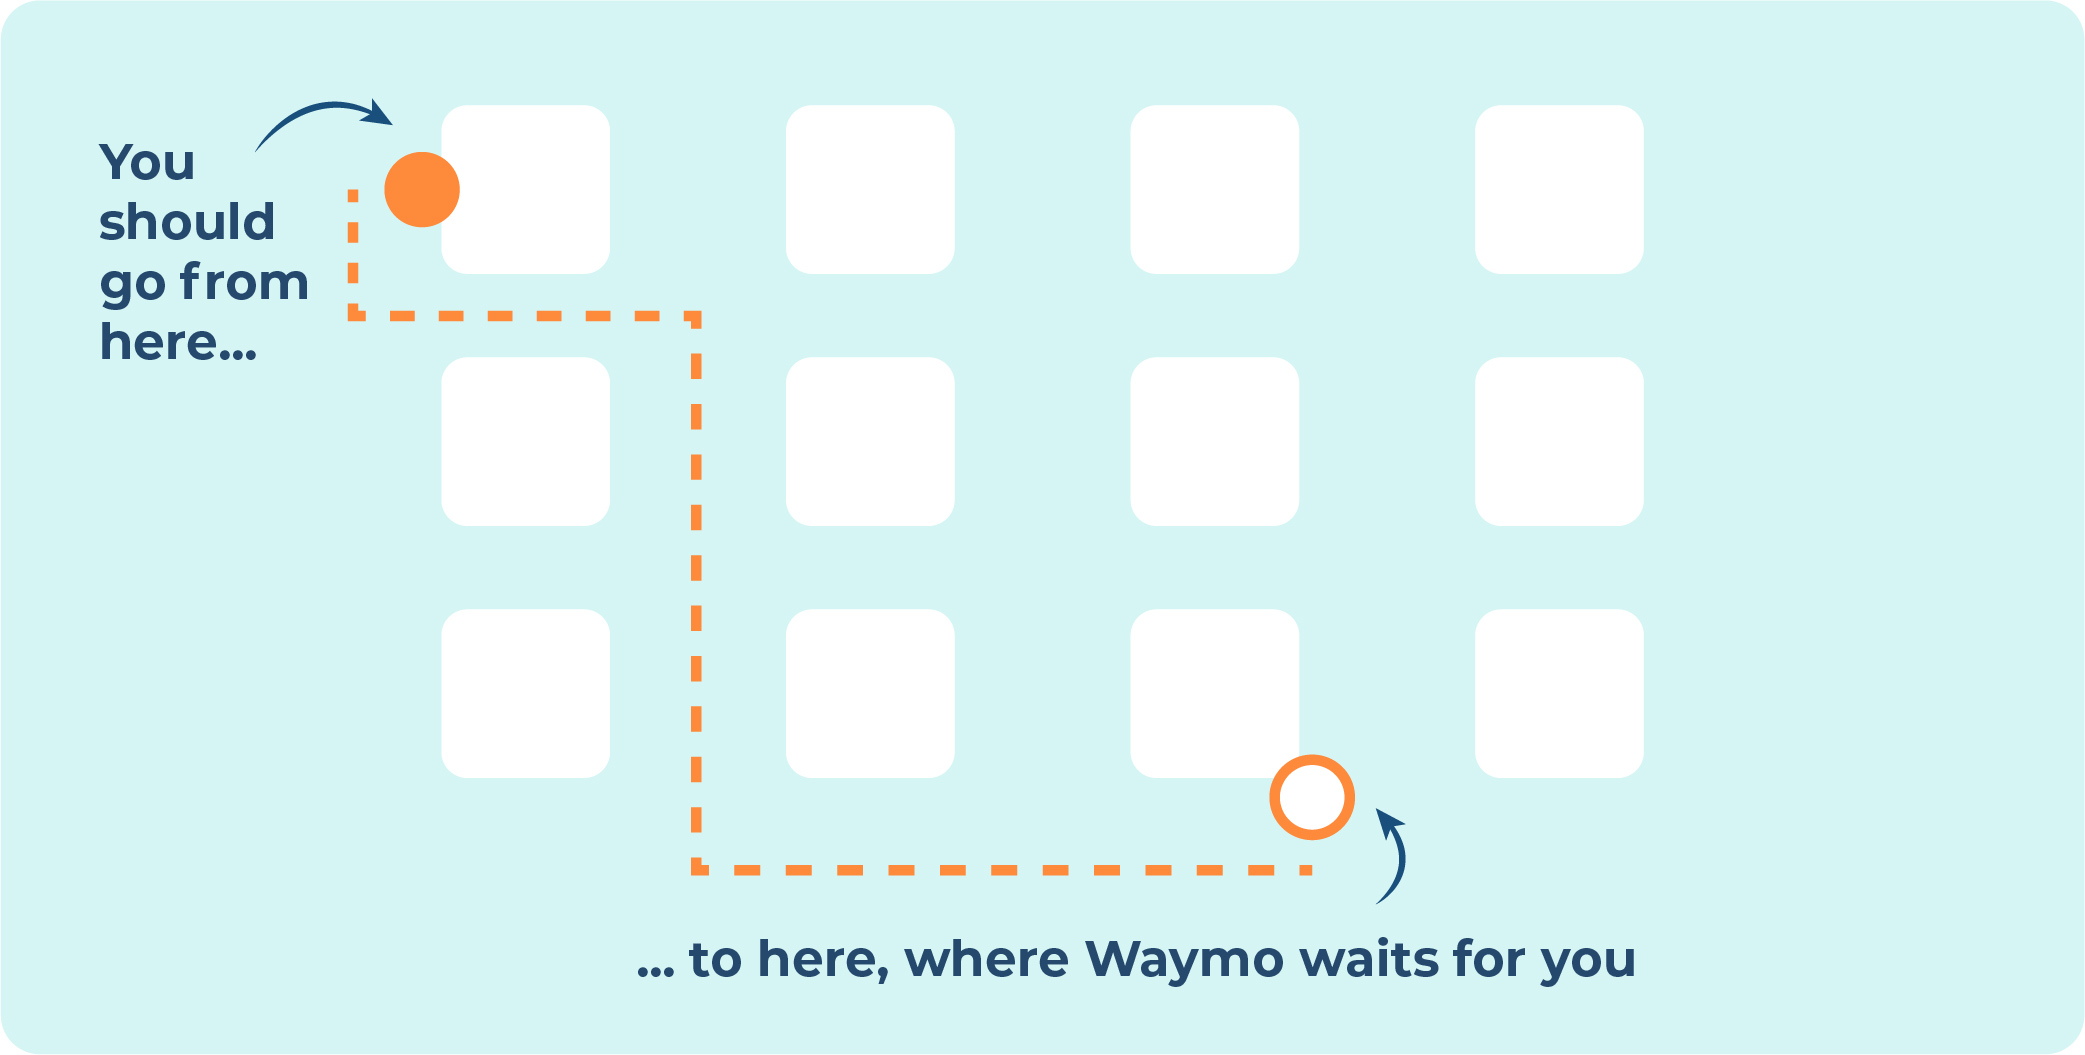 Waymo can park at the designated spots only